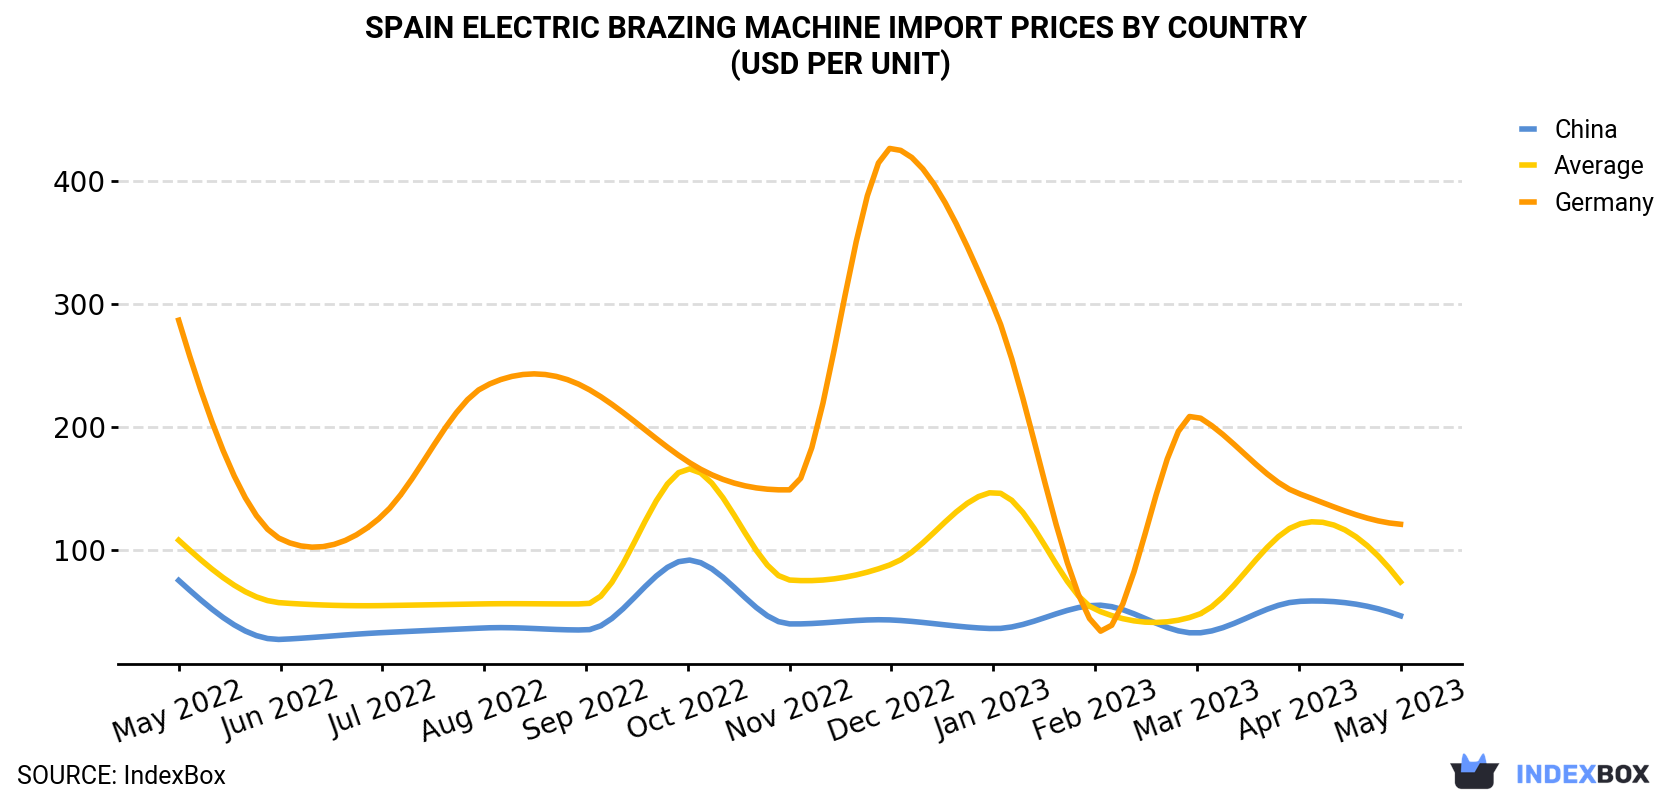 Spain Electric Brazing Machine Import Prices By Country (USD Per Unit)